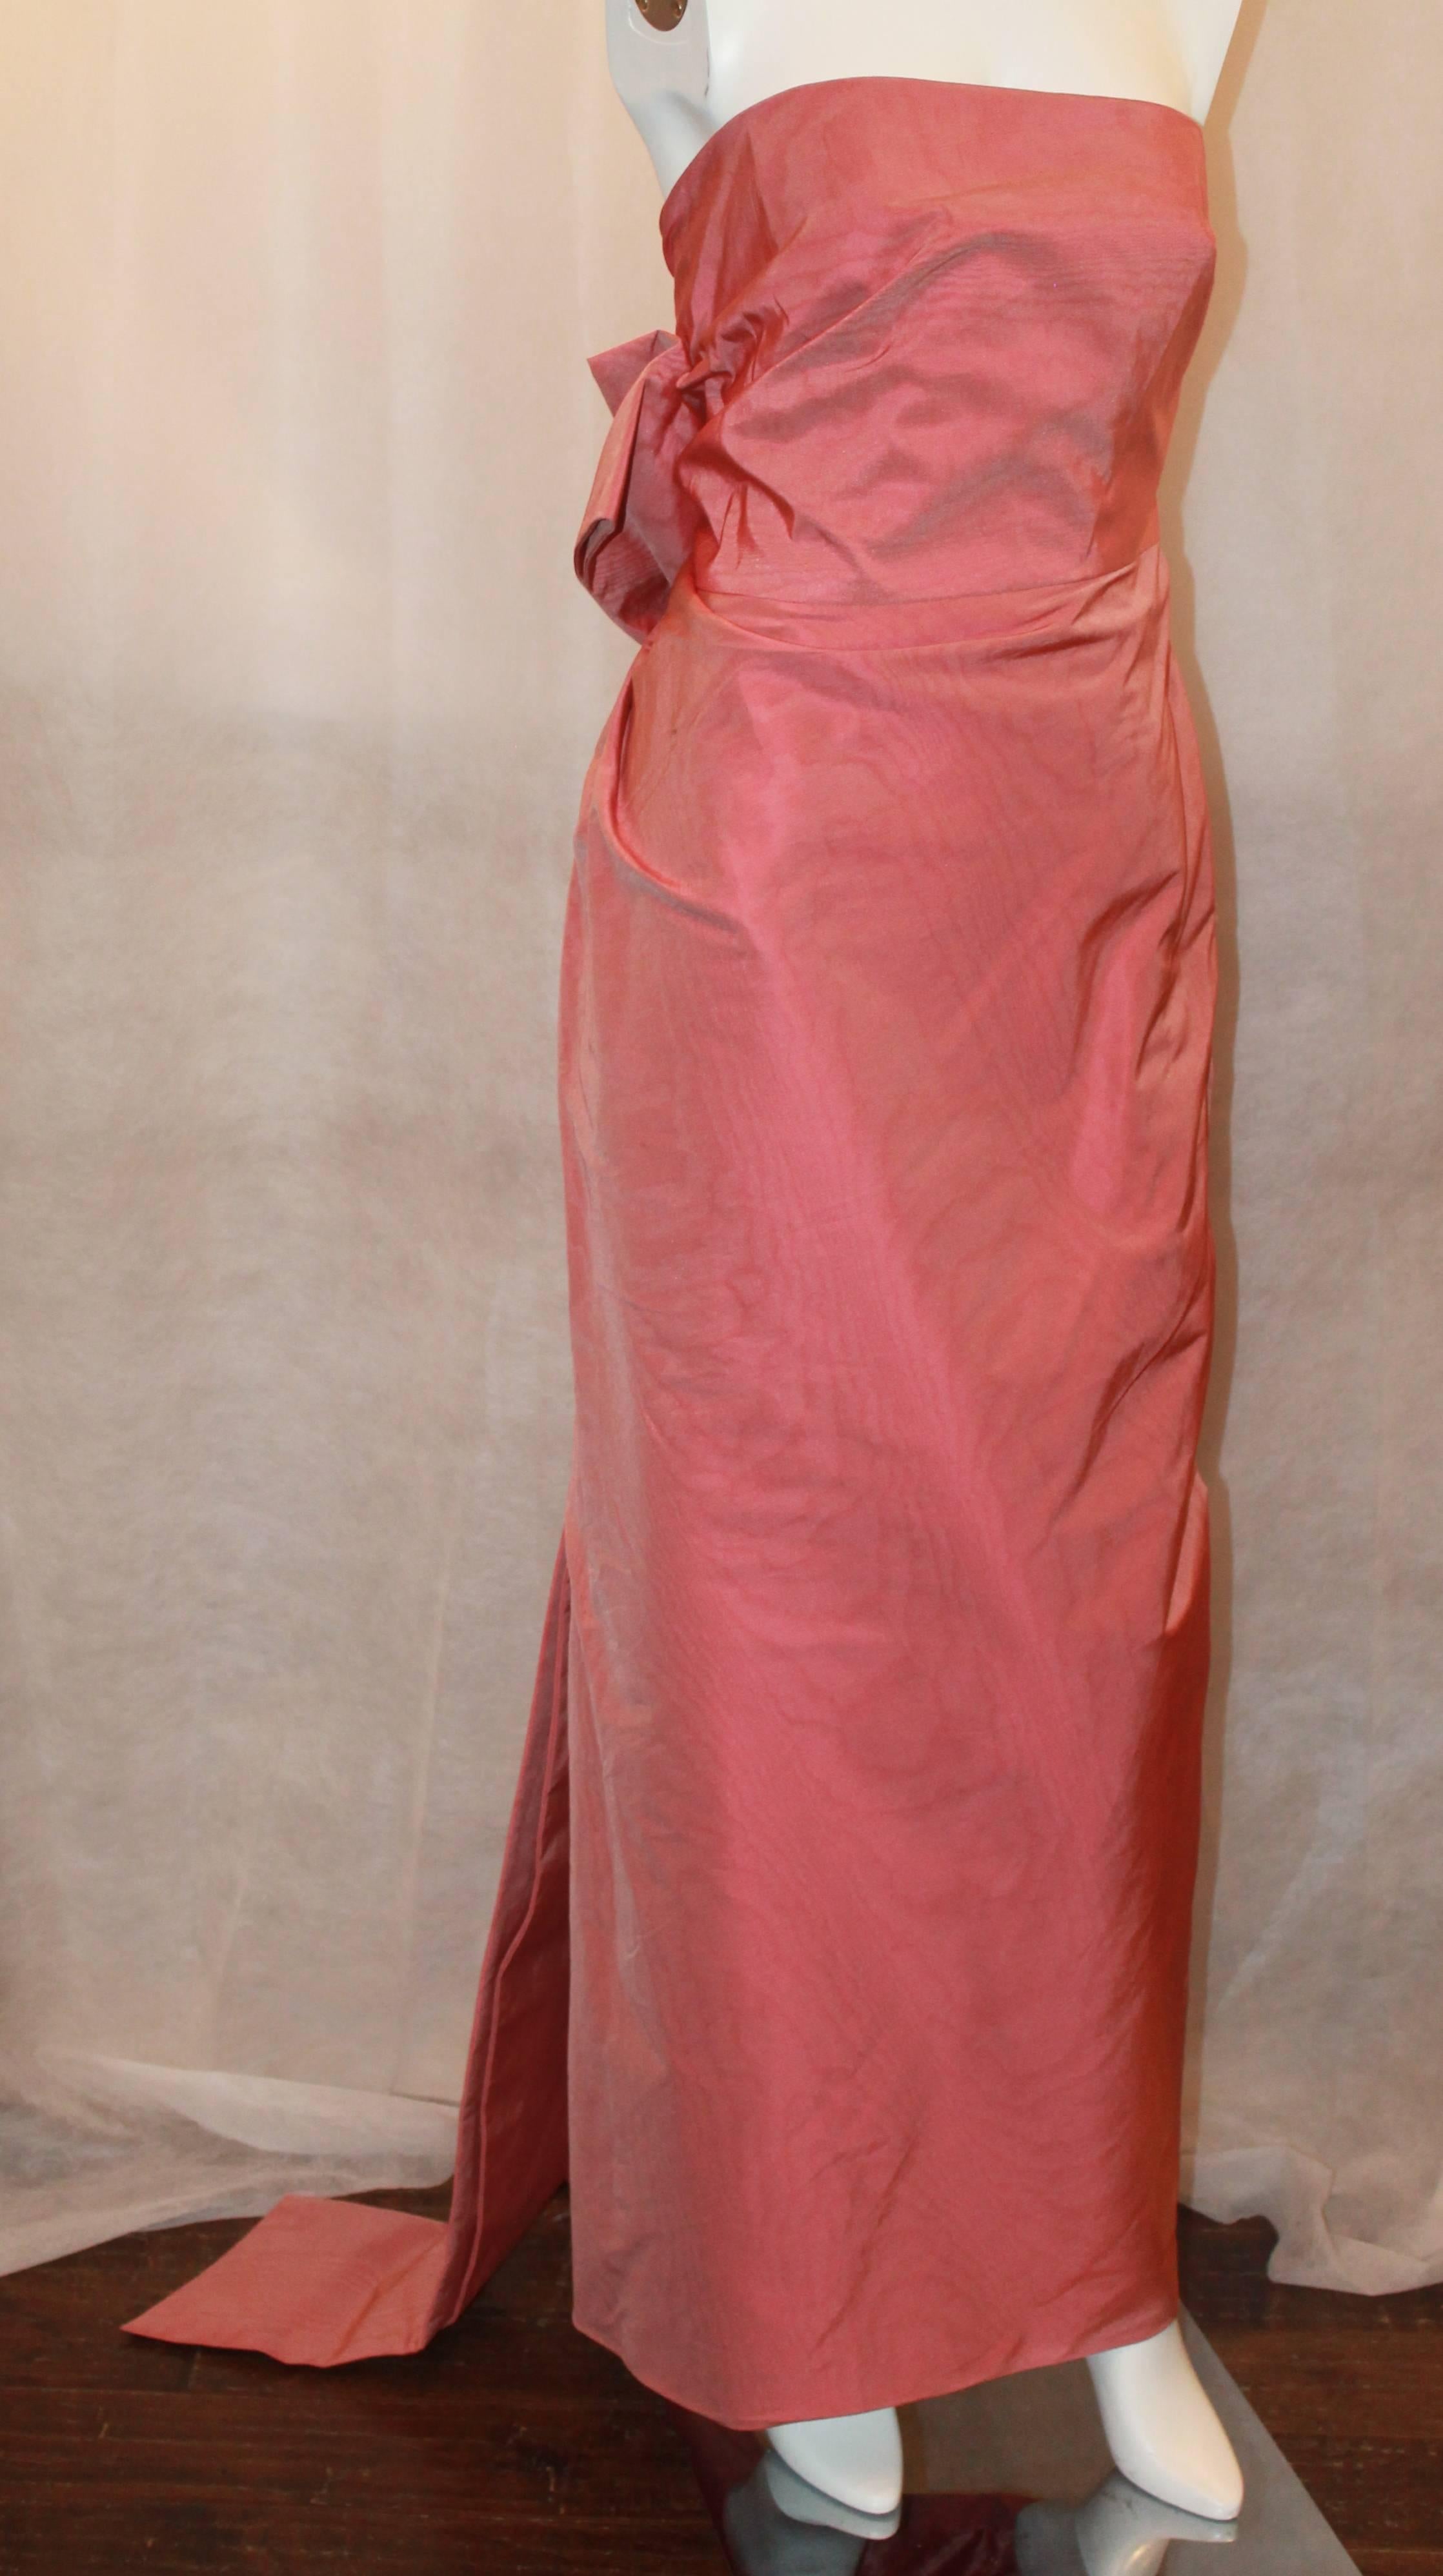 Carolina Herrera Salmon Silk Taffeta Strapless Gown w/ Ruching & Back Bow - 8 - NWT.  This lovely gown is new with tags.  It features side ruching, a floor length bow in the back, and a side zipper.

Measurements:
Bust: 30.5